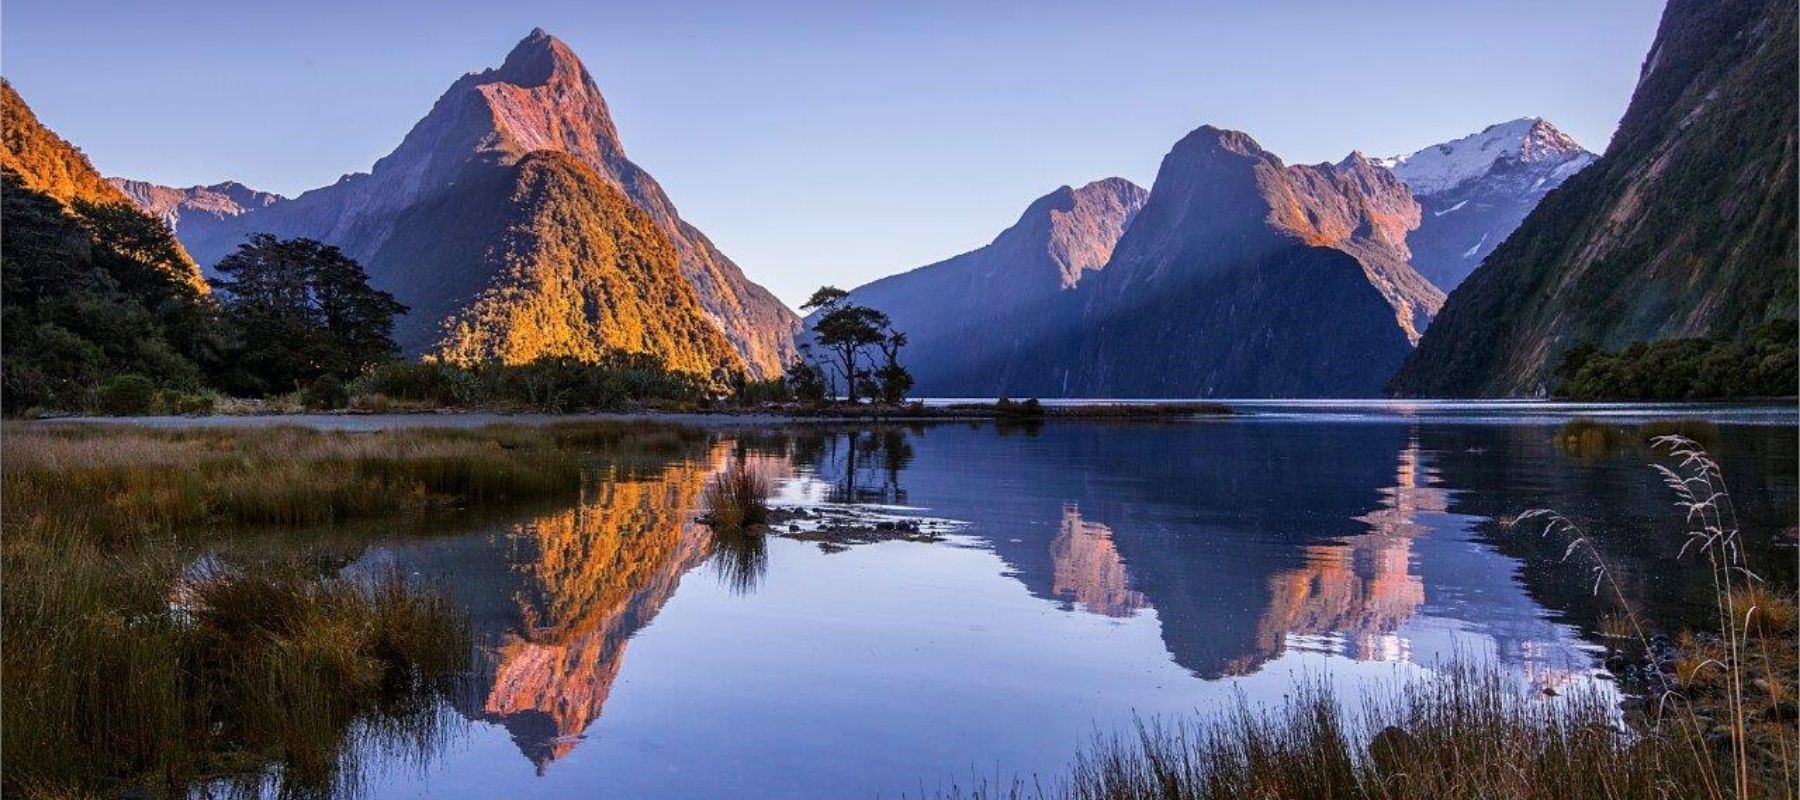 The morning sun aluminates peaks, perfectly mirrored in the calm Milford Sound.